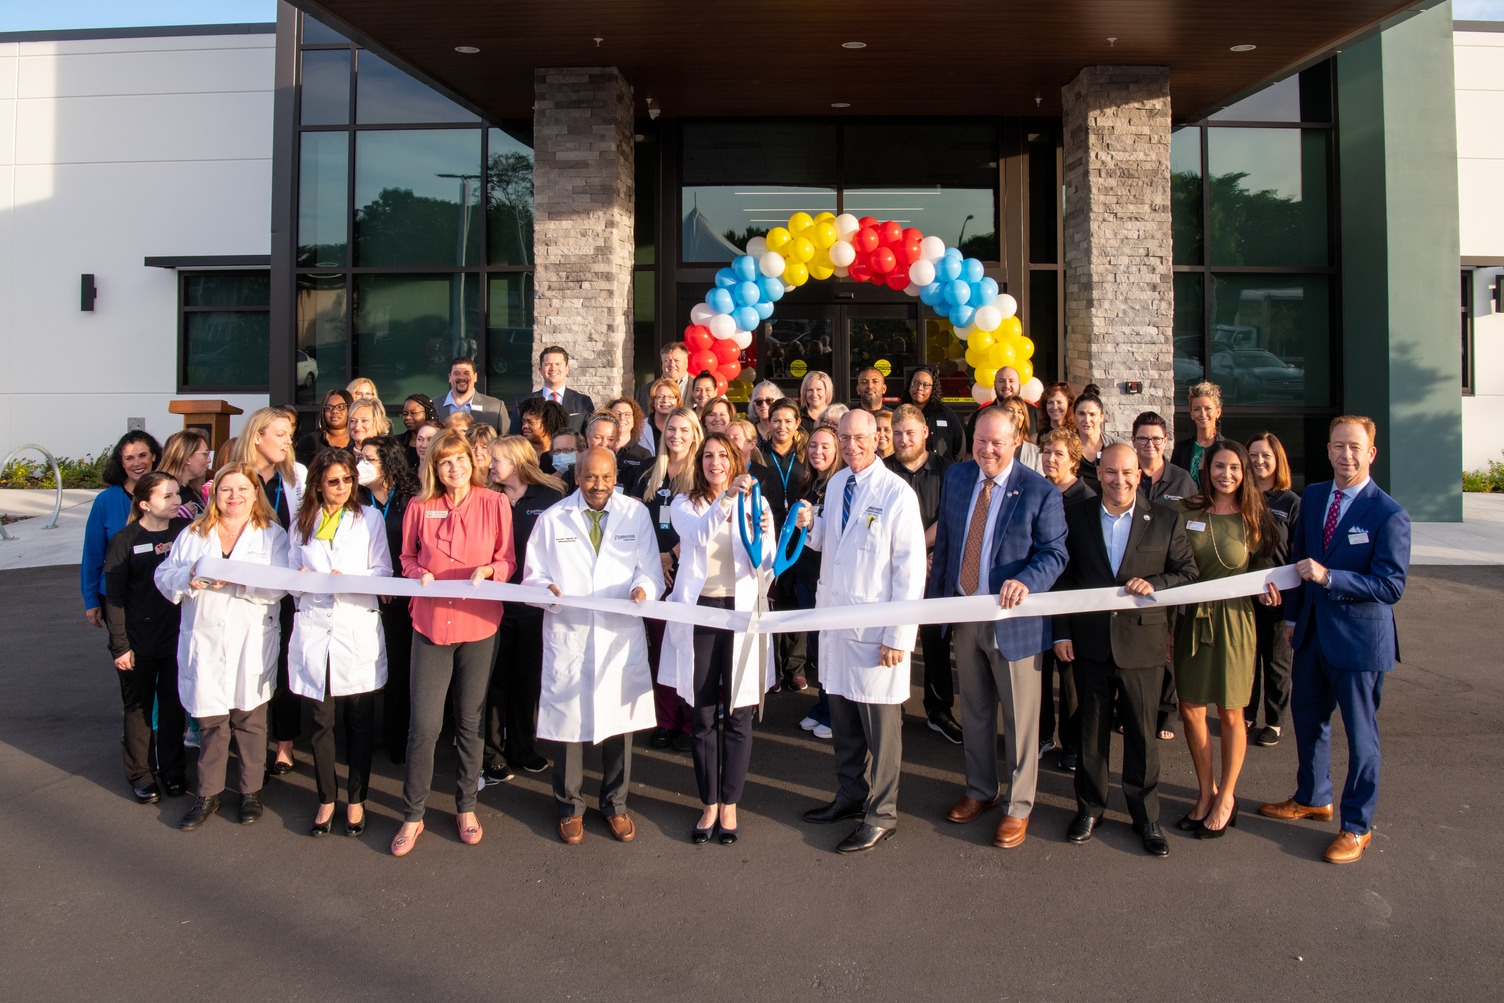 Florida Cancer Specialists holds ribbon cutting celebration for new facility